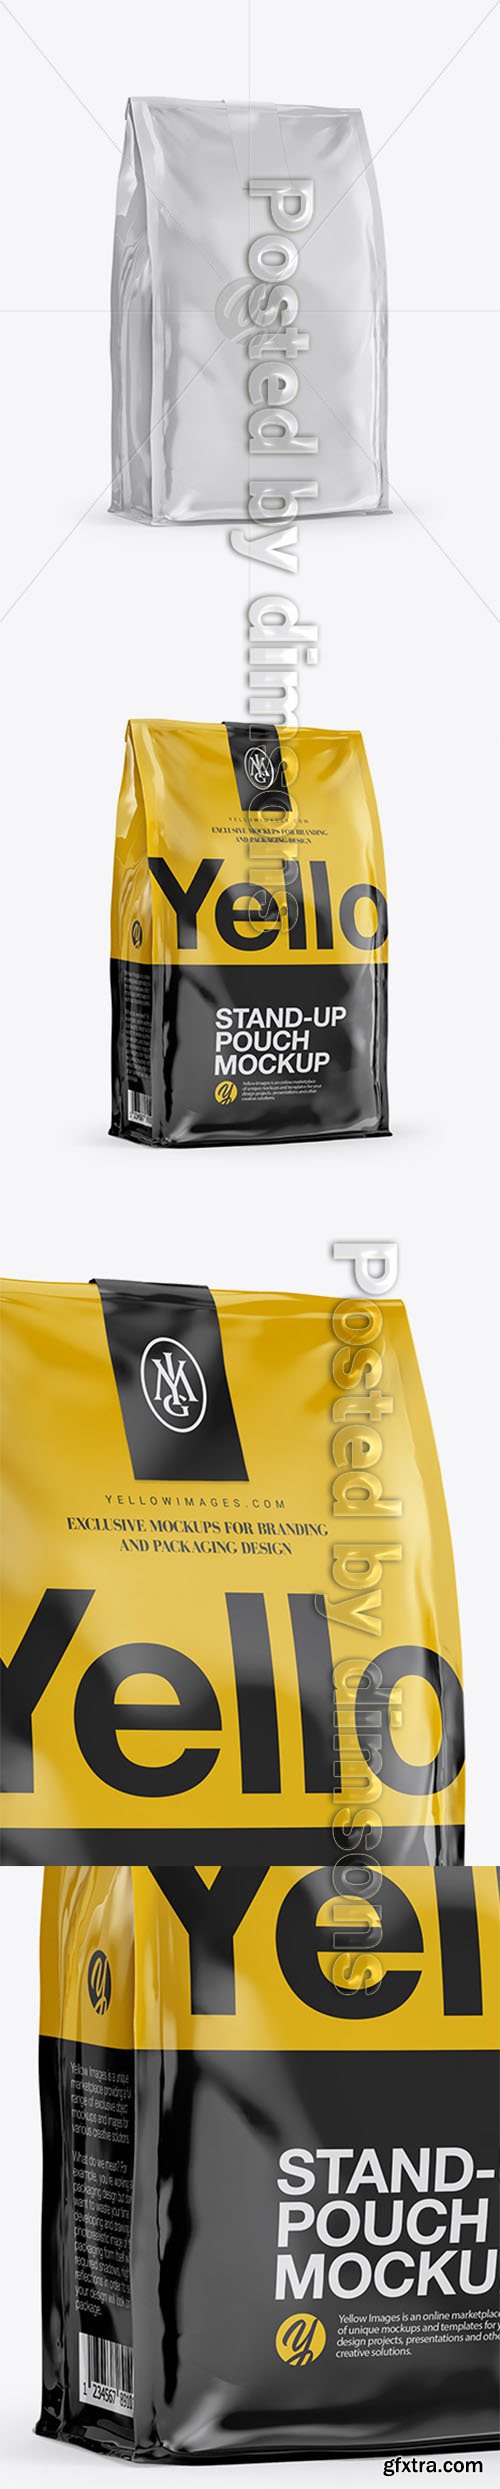 Stand Up Glossy Pouch with Sticker Mockup - Half Side View 22662